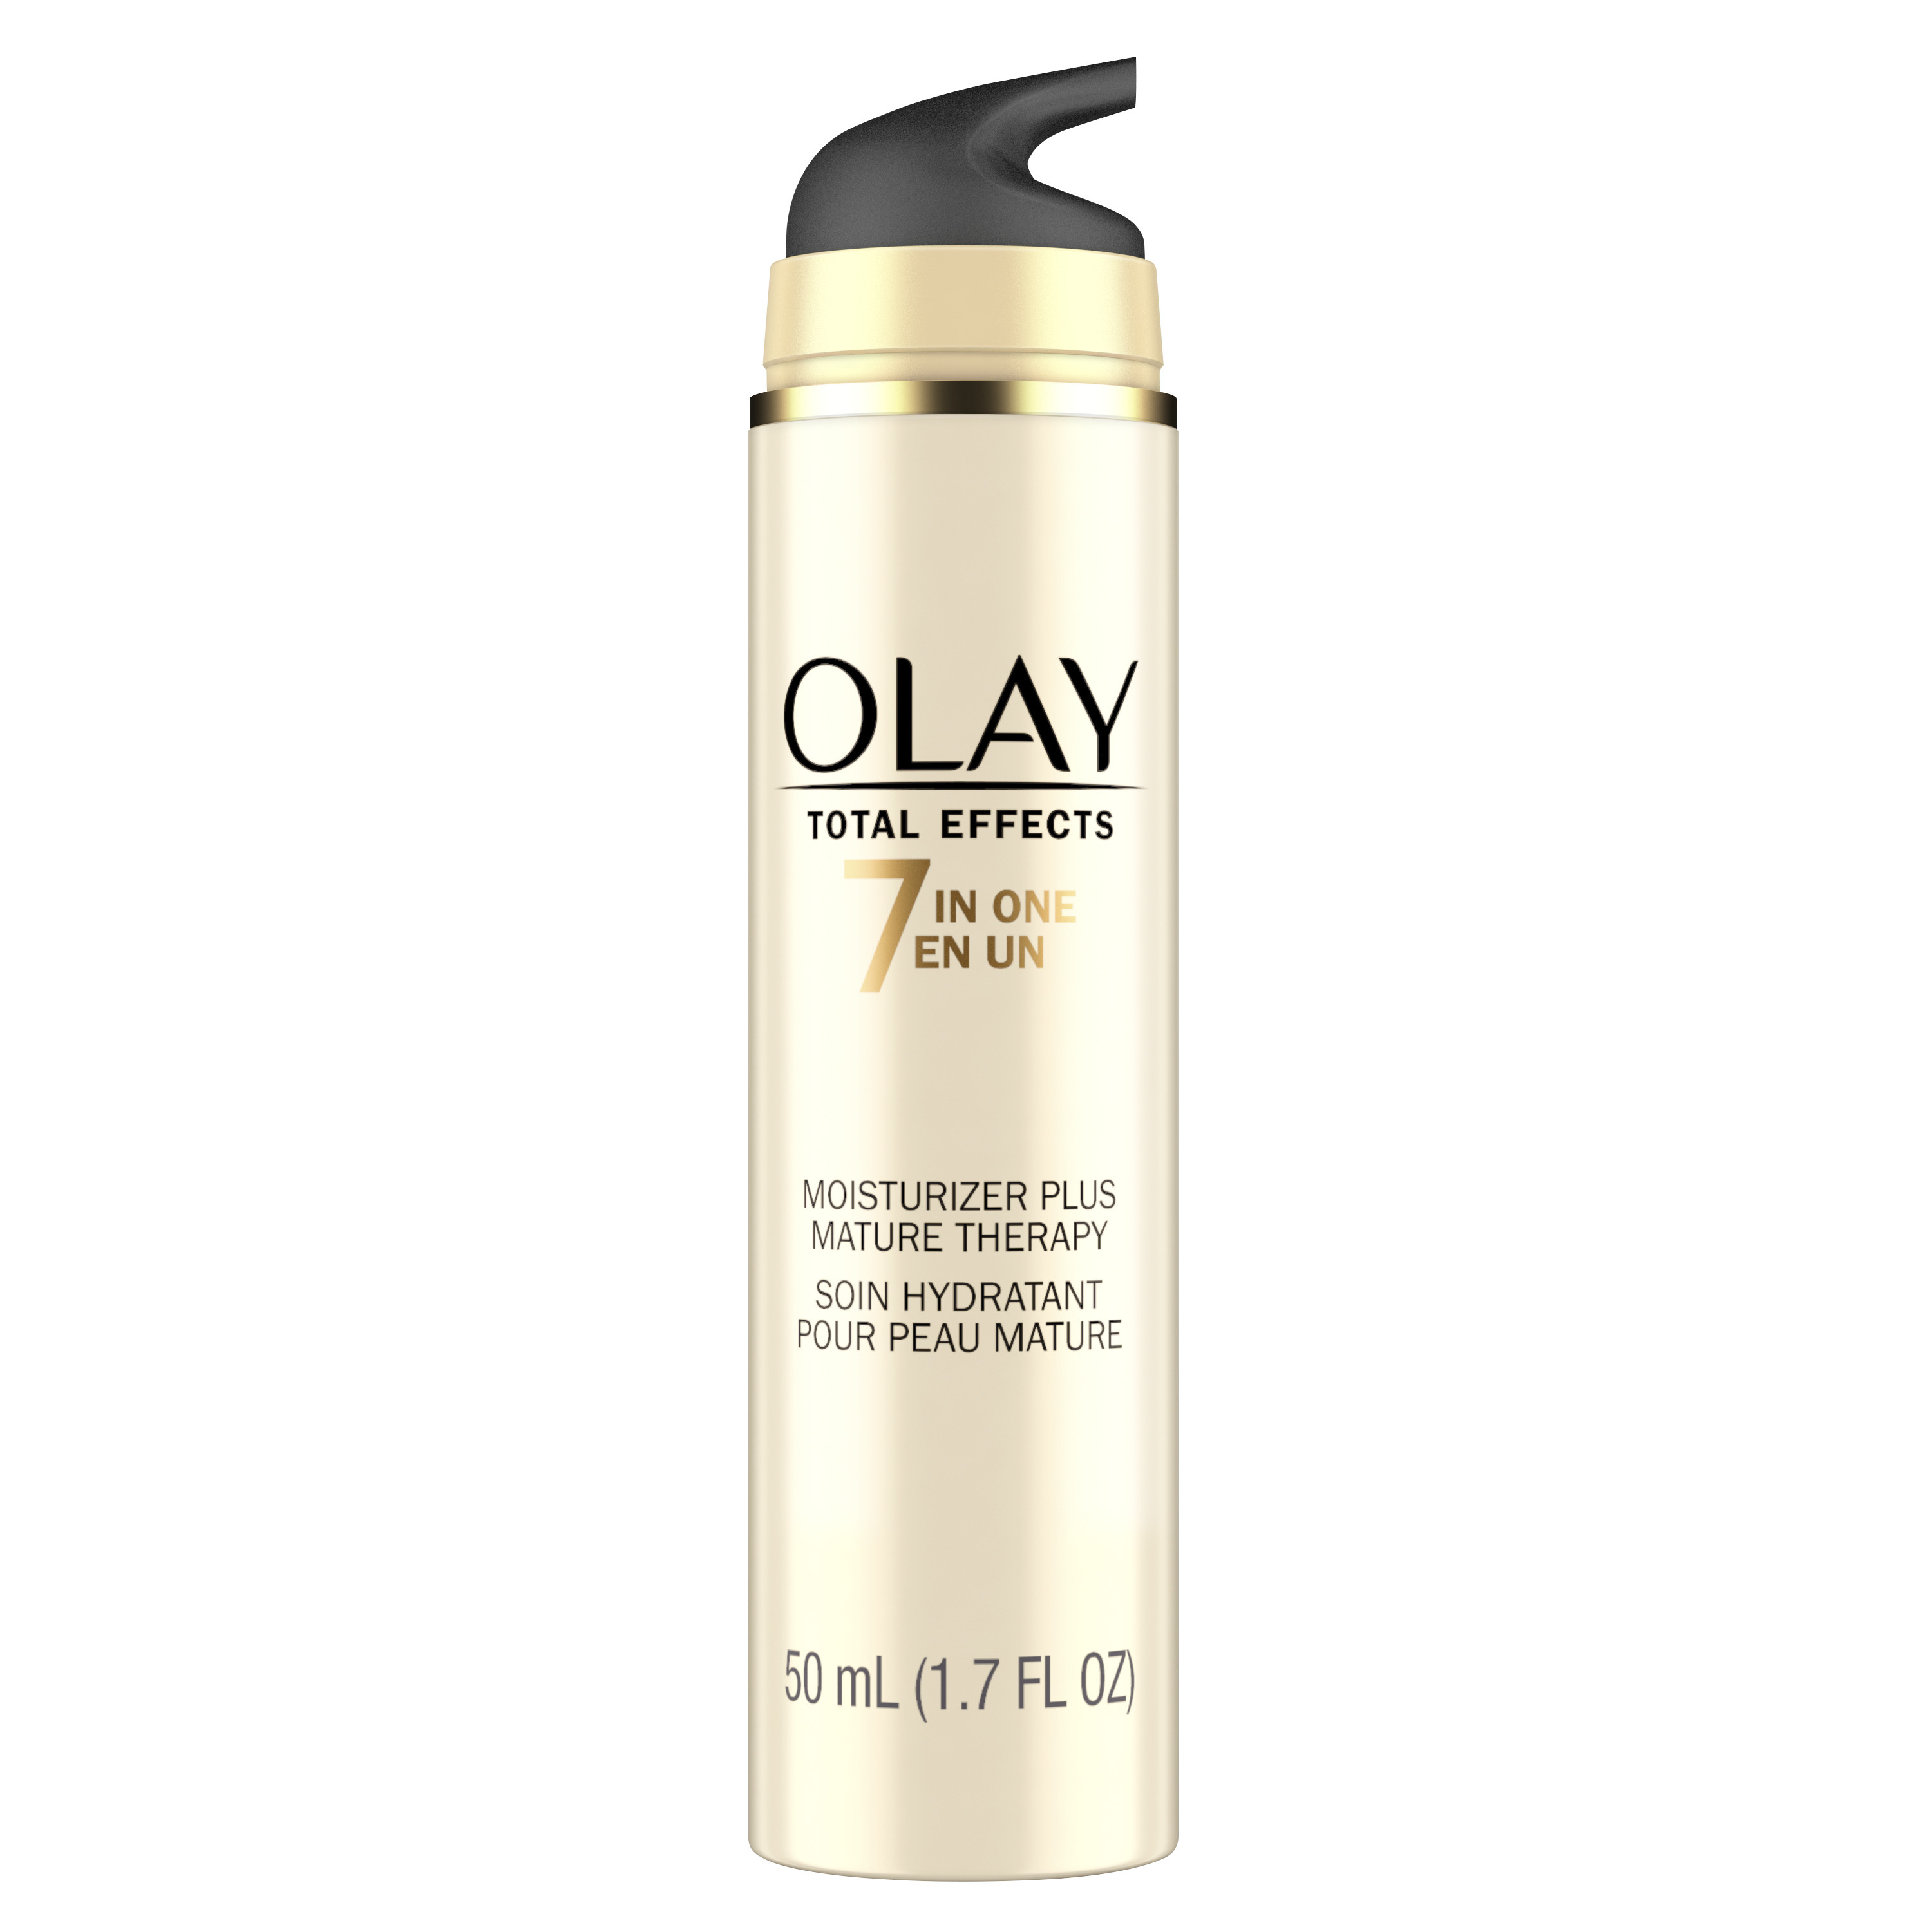 Olay Total Effects Face Moisturizer Plus Mature Therapy, 1.7 fl oz - image 1 of 9